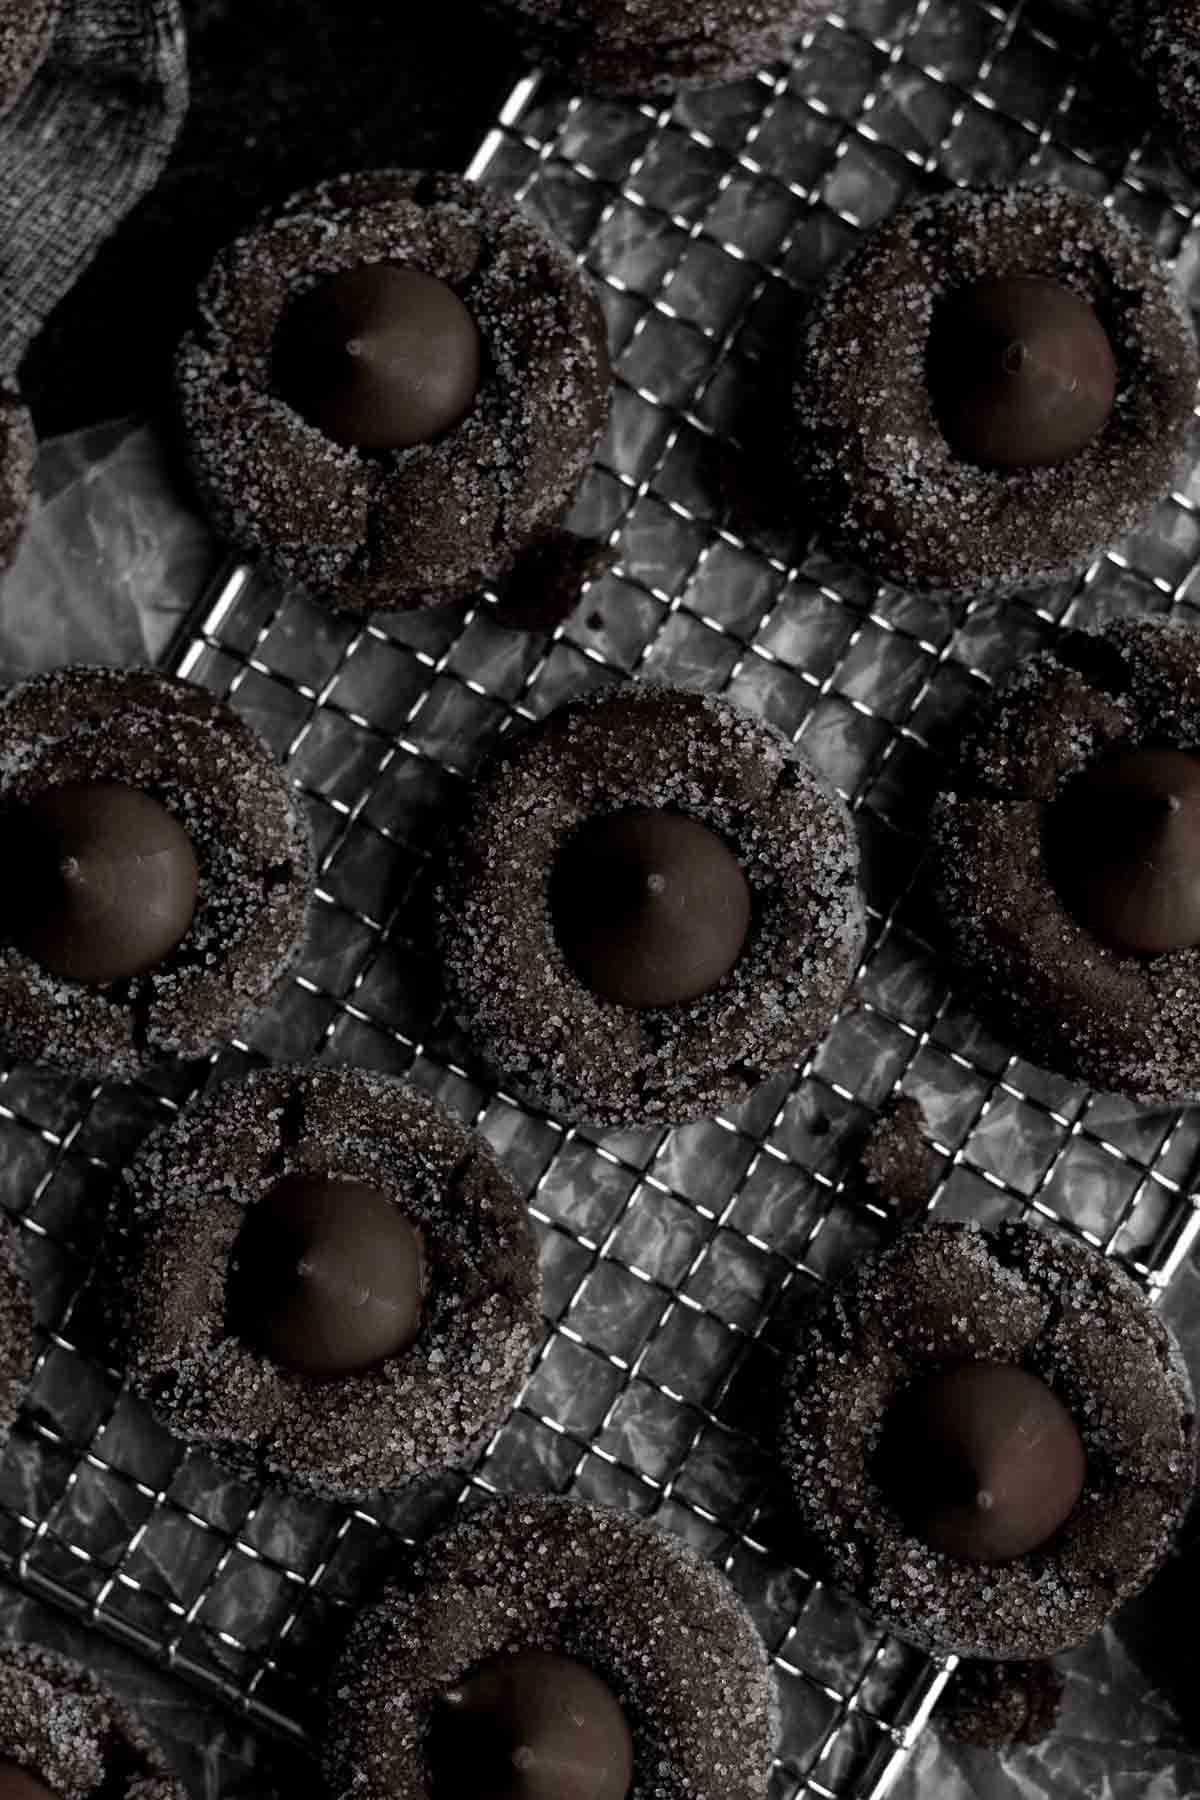 Seven Chocolate Blossom Cookies sit sexily with crystalized sugar.